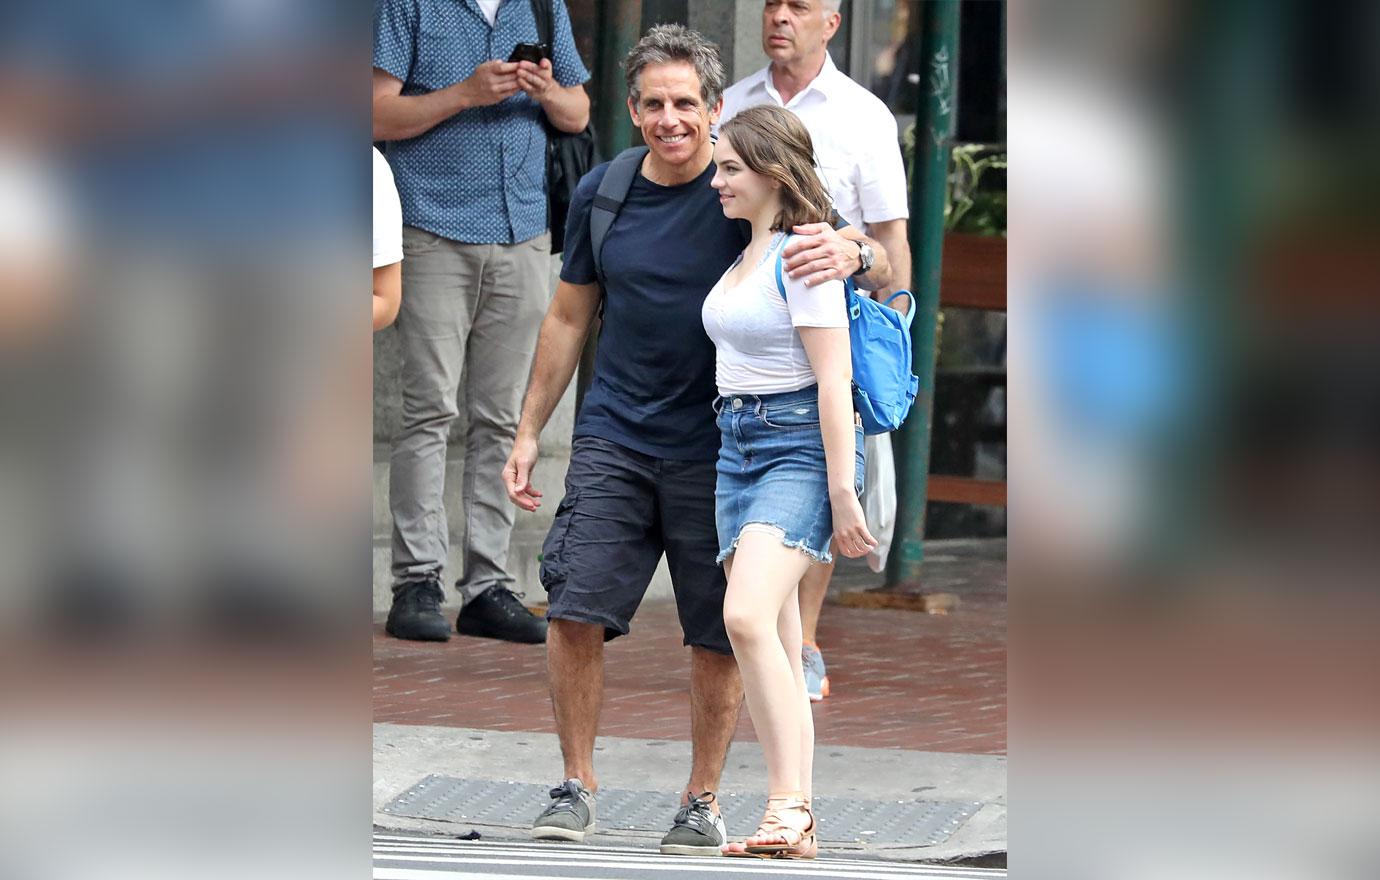 Pics Ben Stiller Spends A Day In New York City With His Daughter [ella]